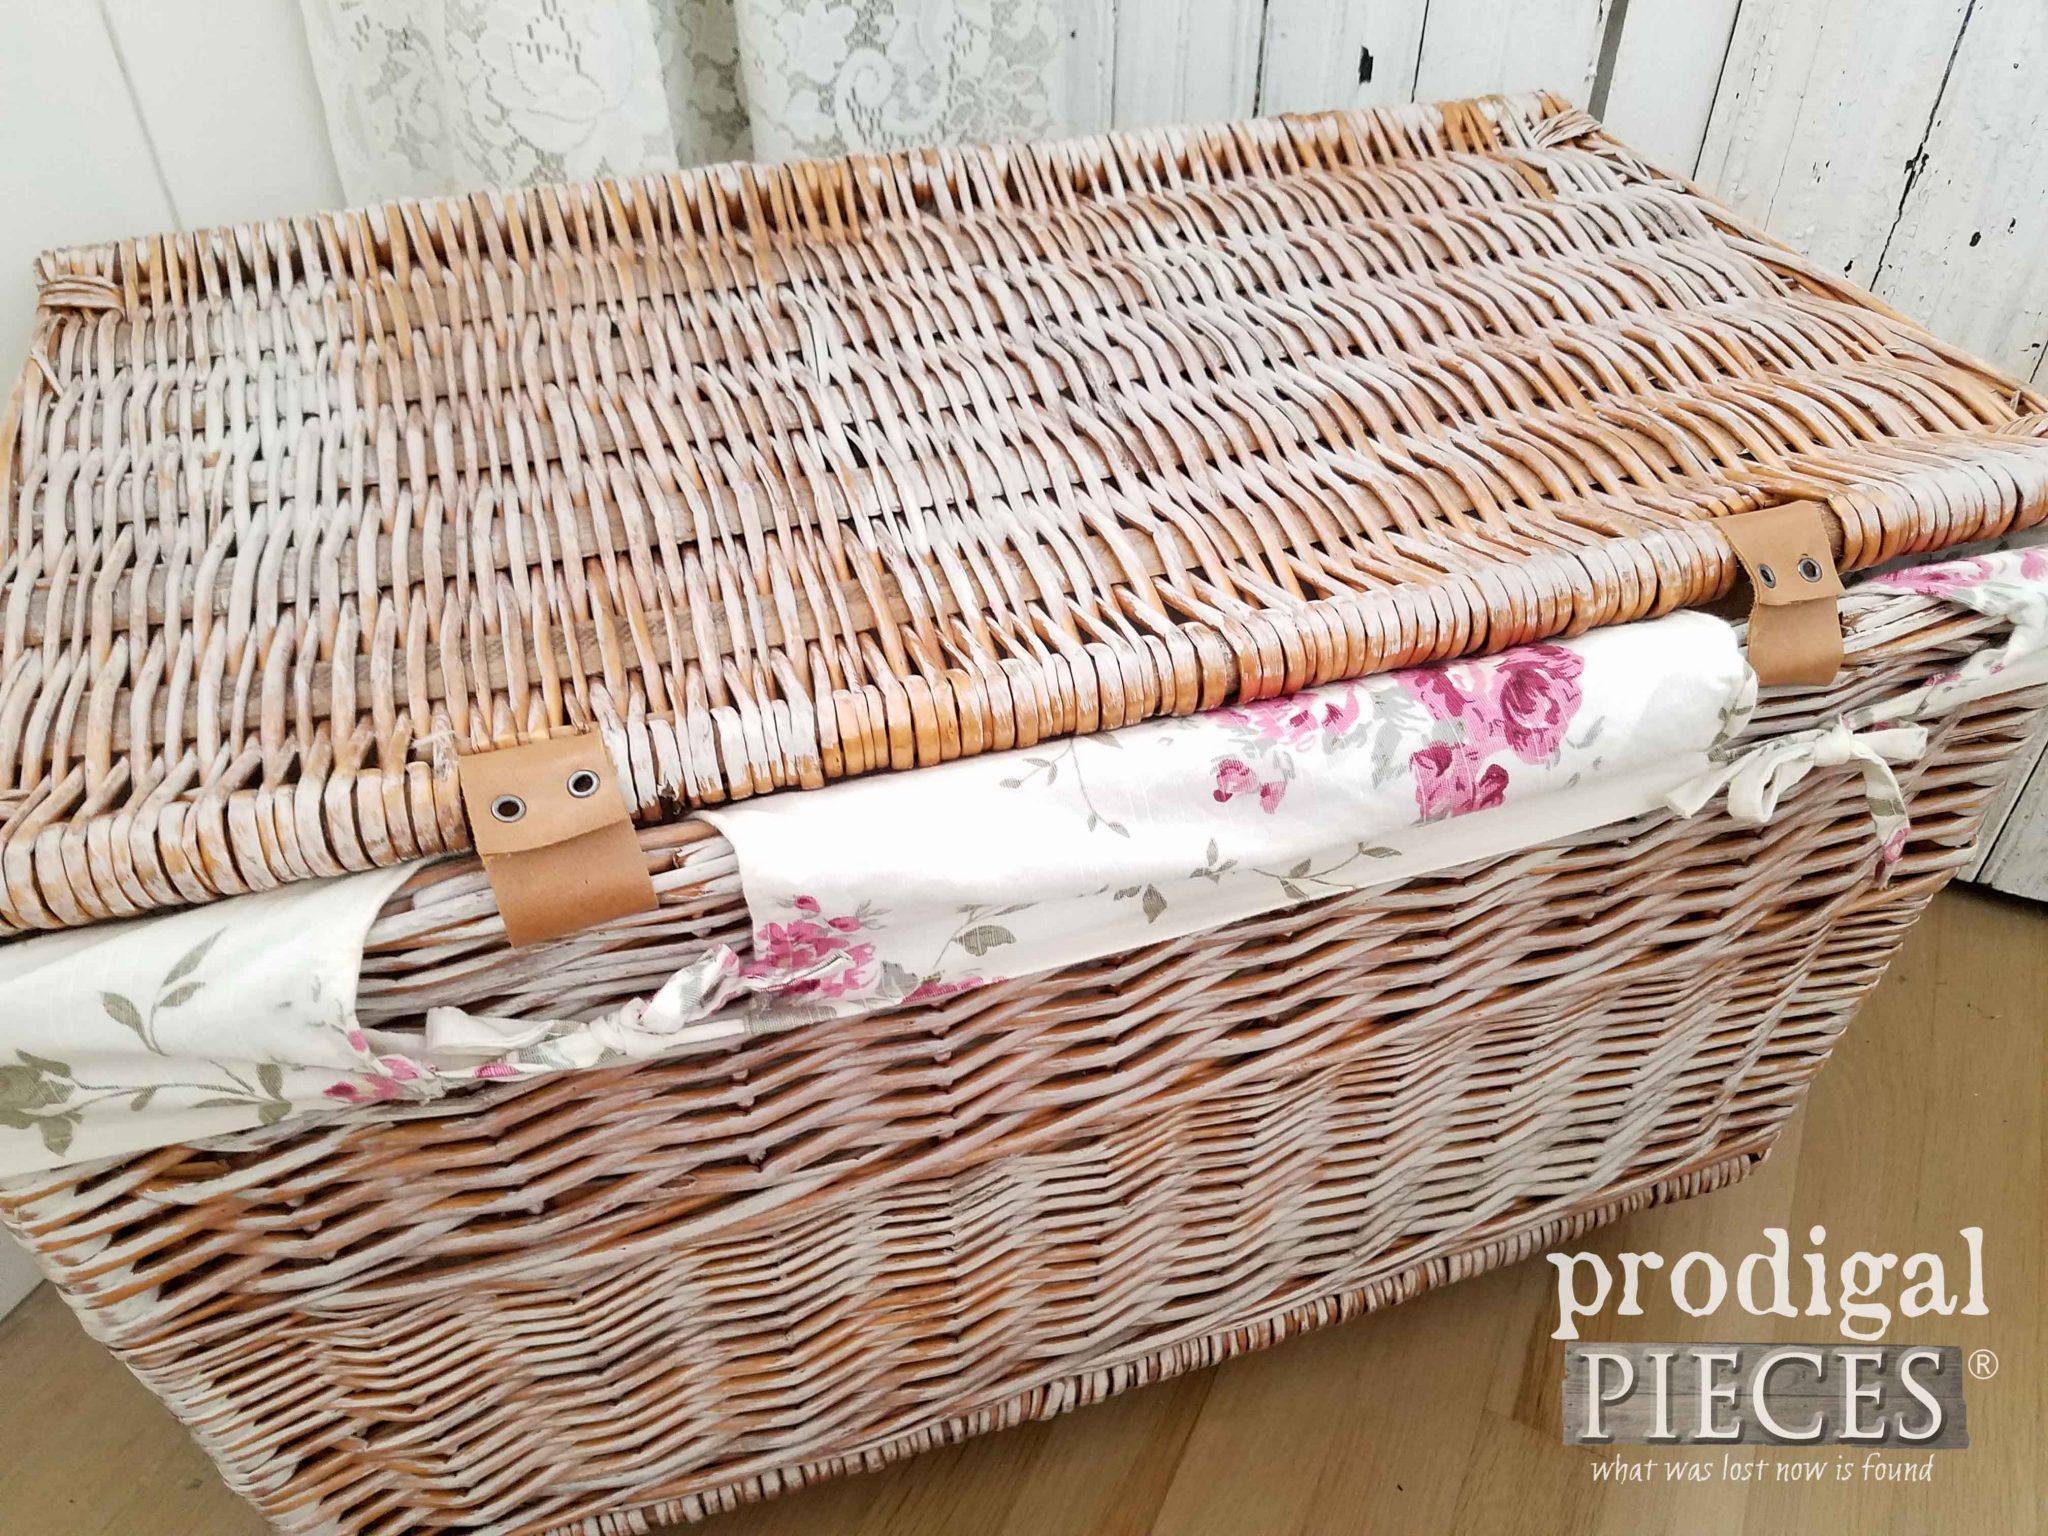 Hinged Laundry Basket with Leather Straps. DIY Rolling Laundry Cart by Prodigal Pieces | prodigalpieces.com